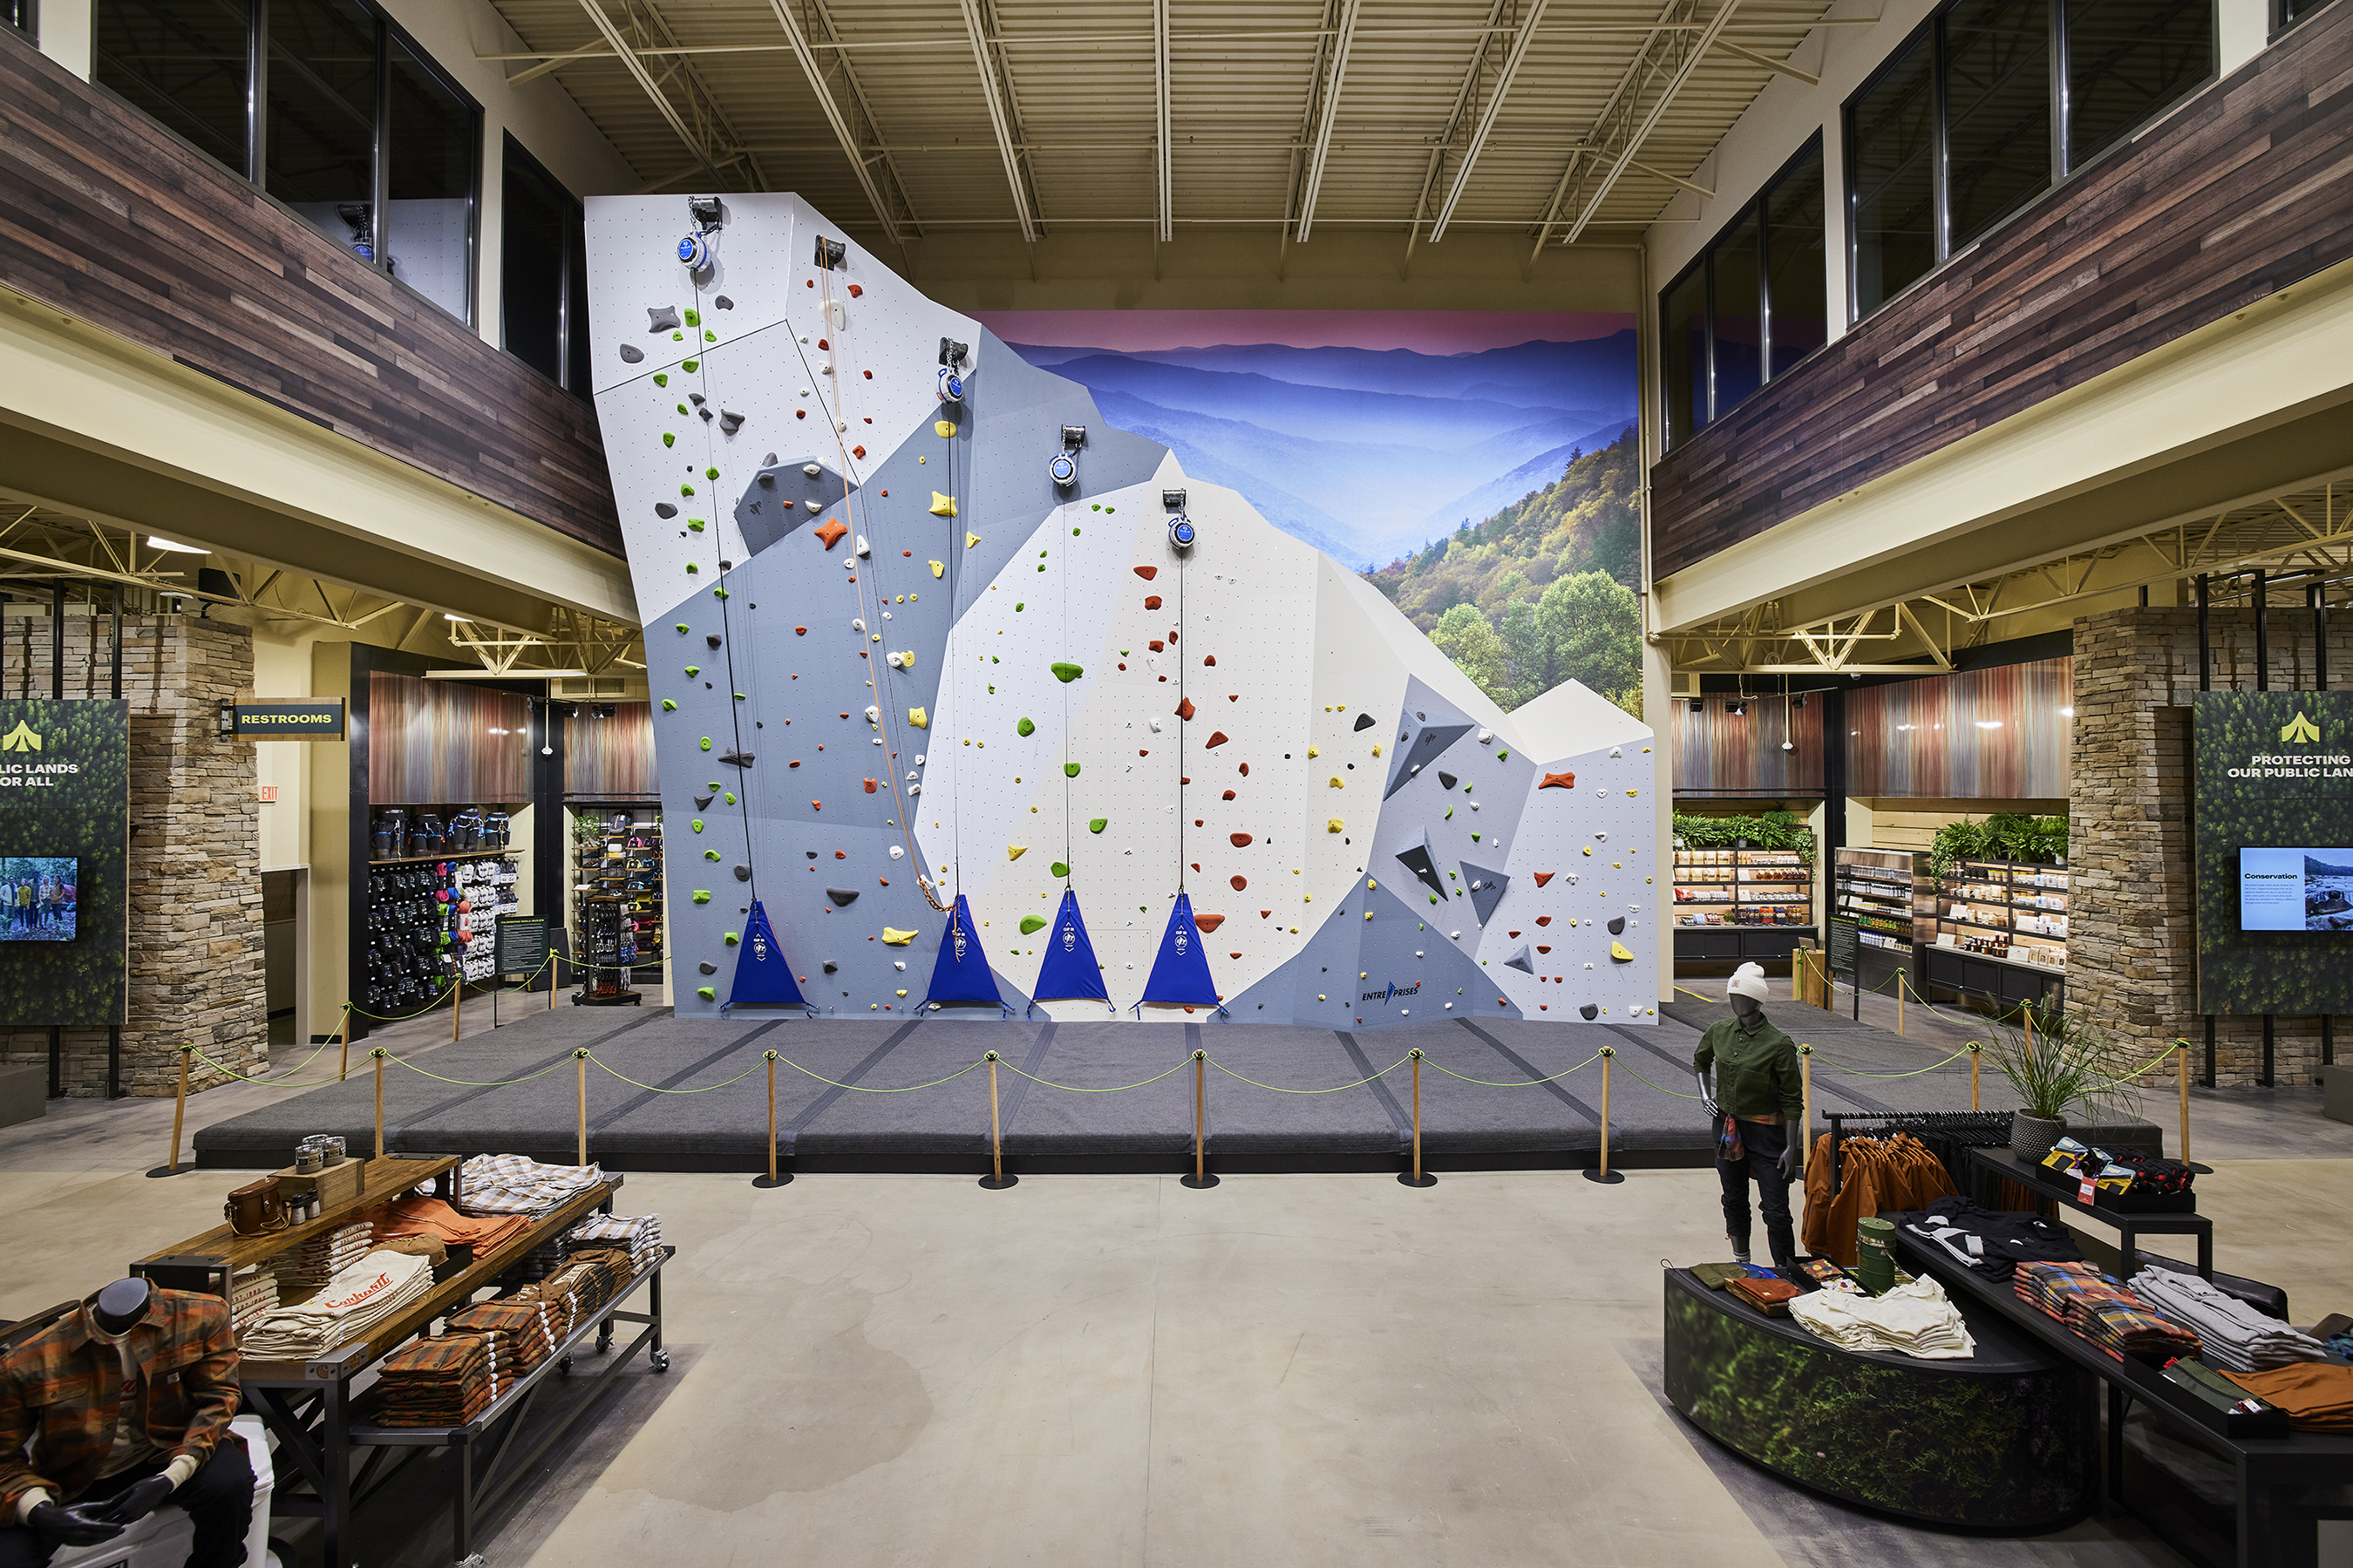 DICK’S Sporting Goods Announces Grand Opening of its First Outdoor Concept Store – Public Lands